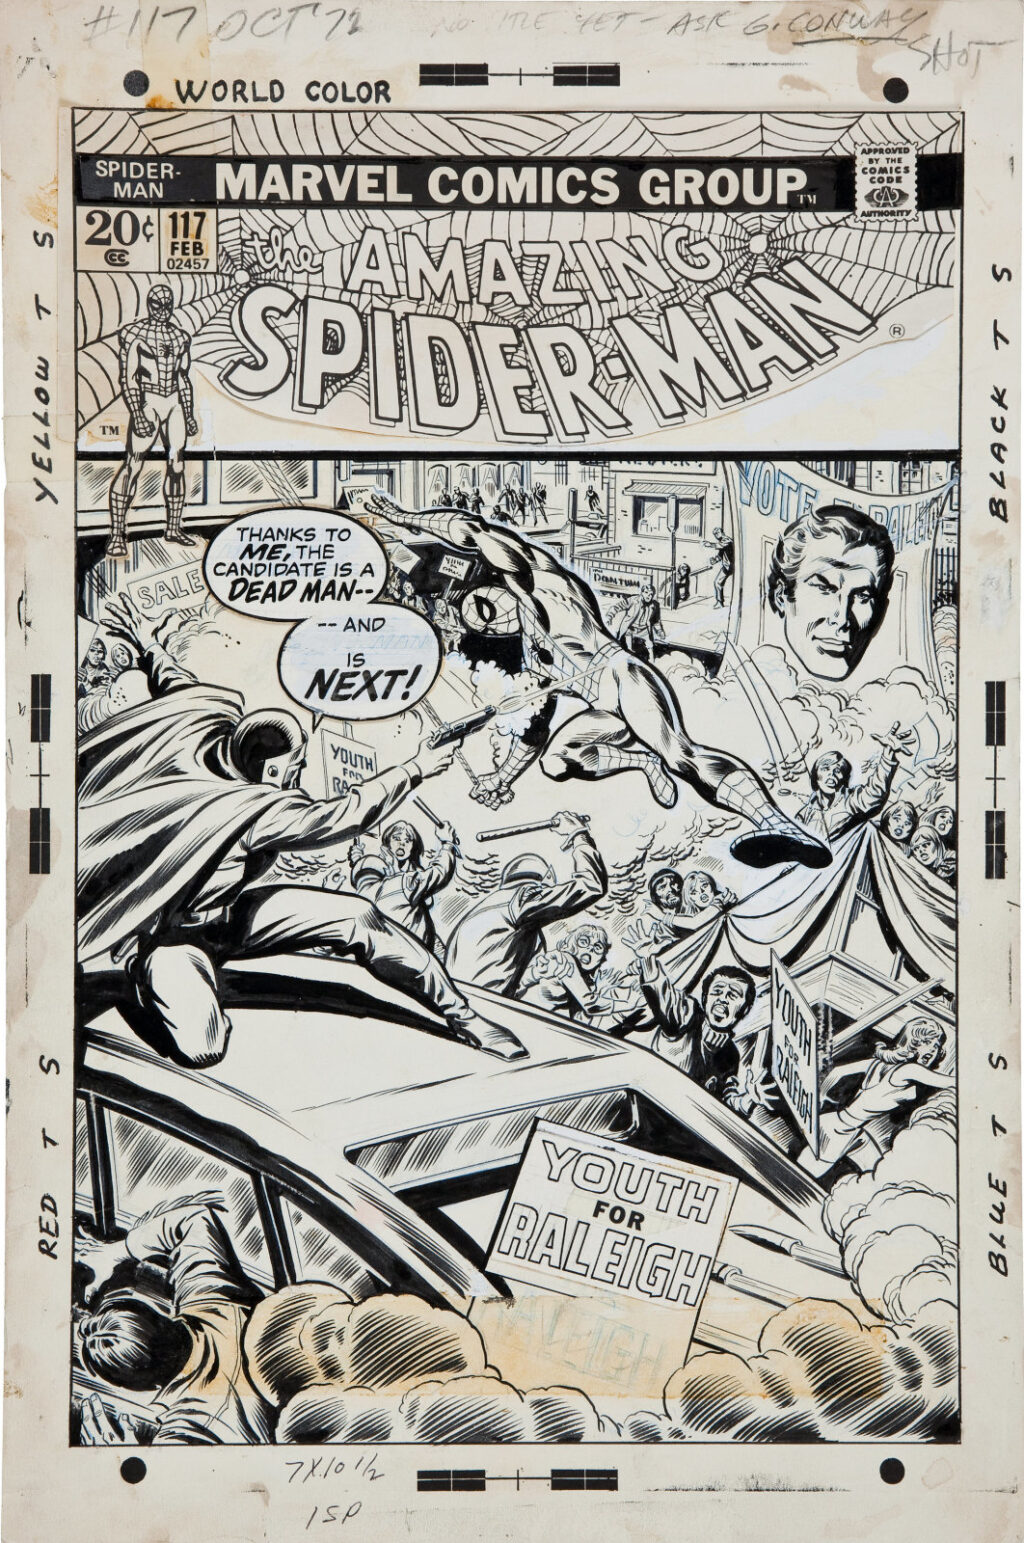 Amazing Spider Man issue 117 cover by John Romita and Jim Mooney